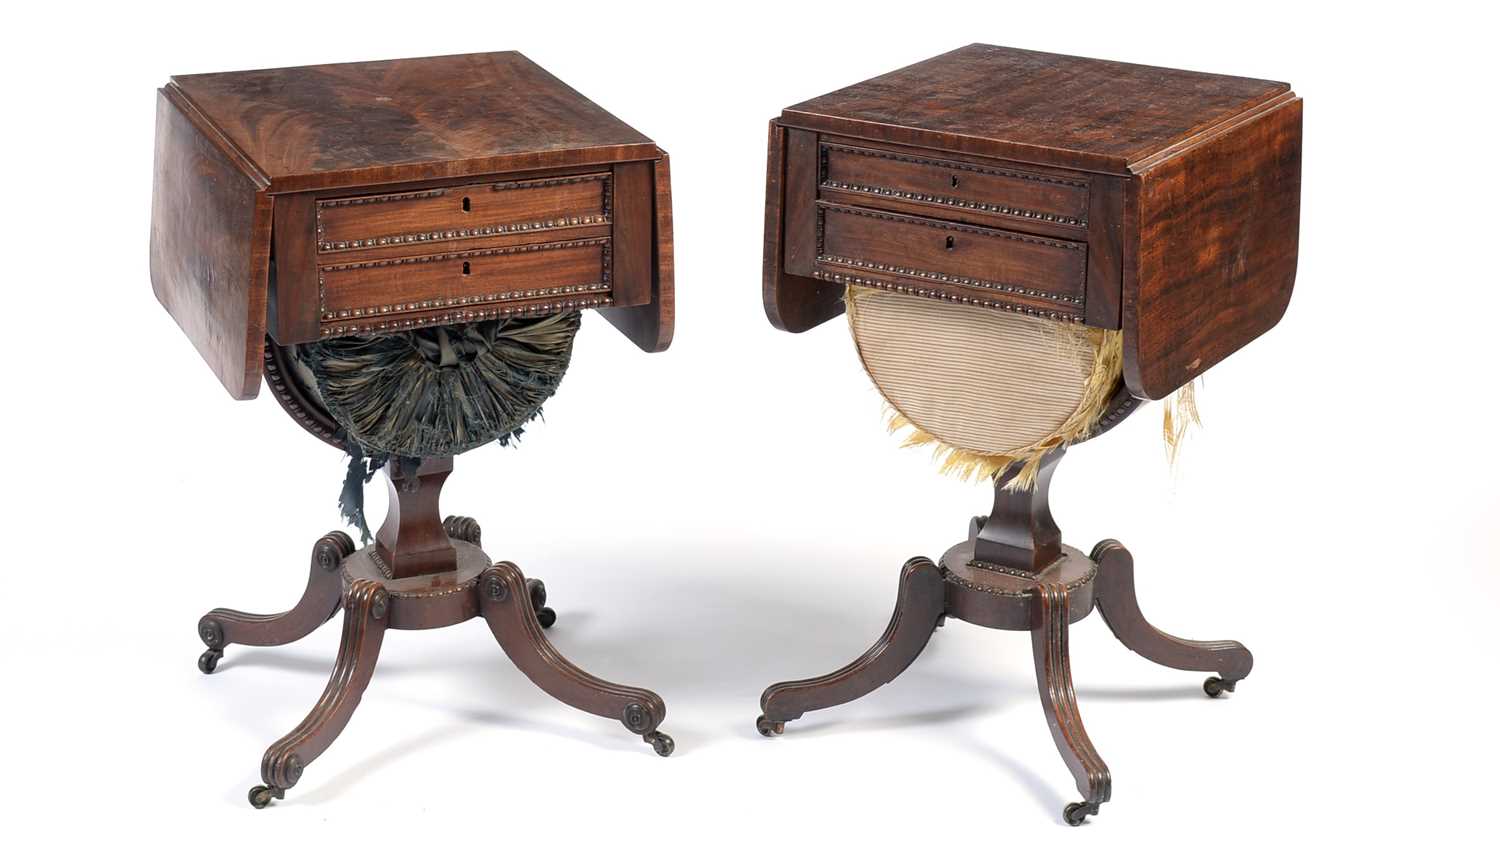 Attributed to William Trotter of Edinburgh: two Regency mahogany work tables